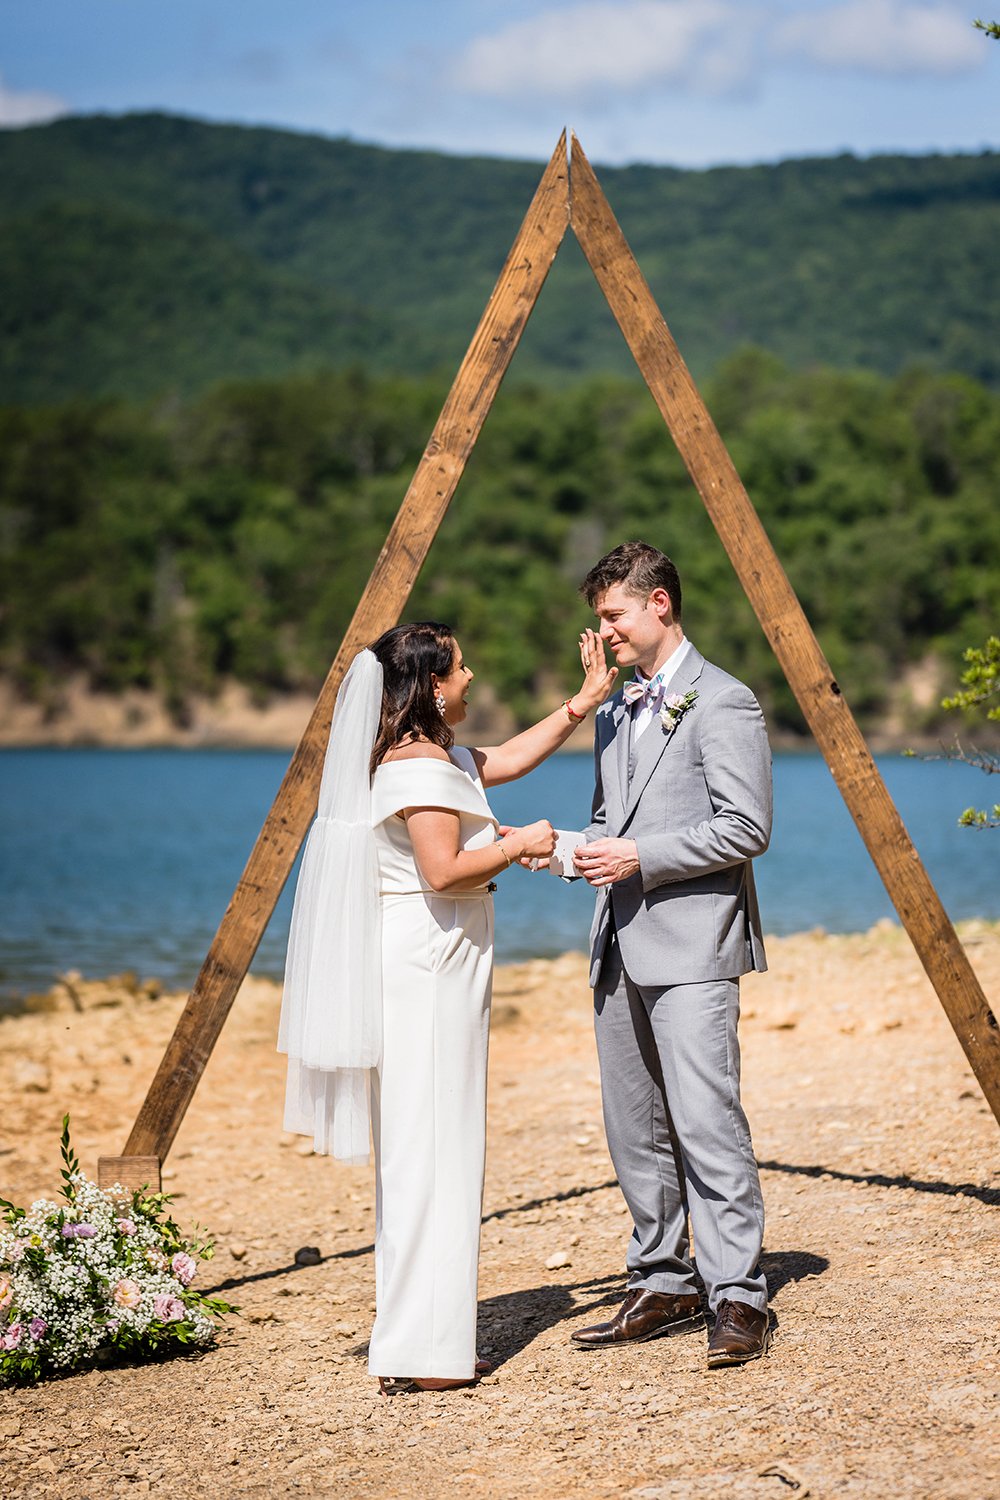 As one marrier finishes reading their vows, their partner wipes away a tear during their elopement at Carvin’s Cove in Roanoke, Virginia.